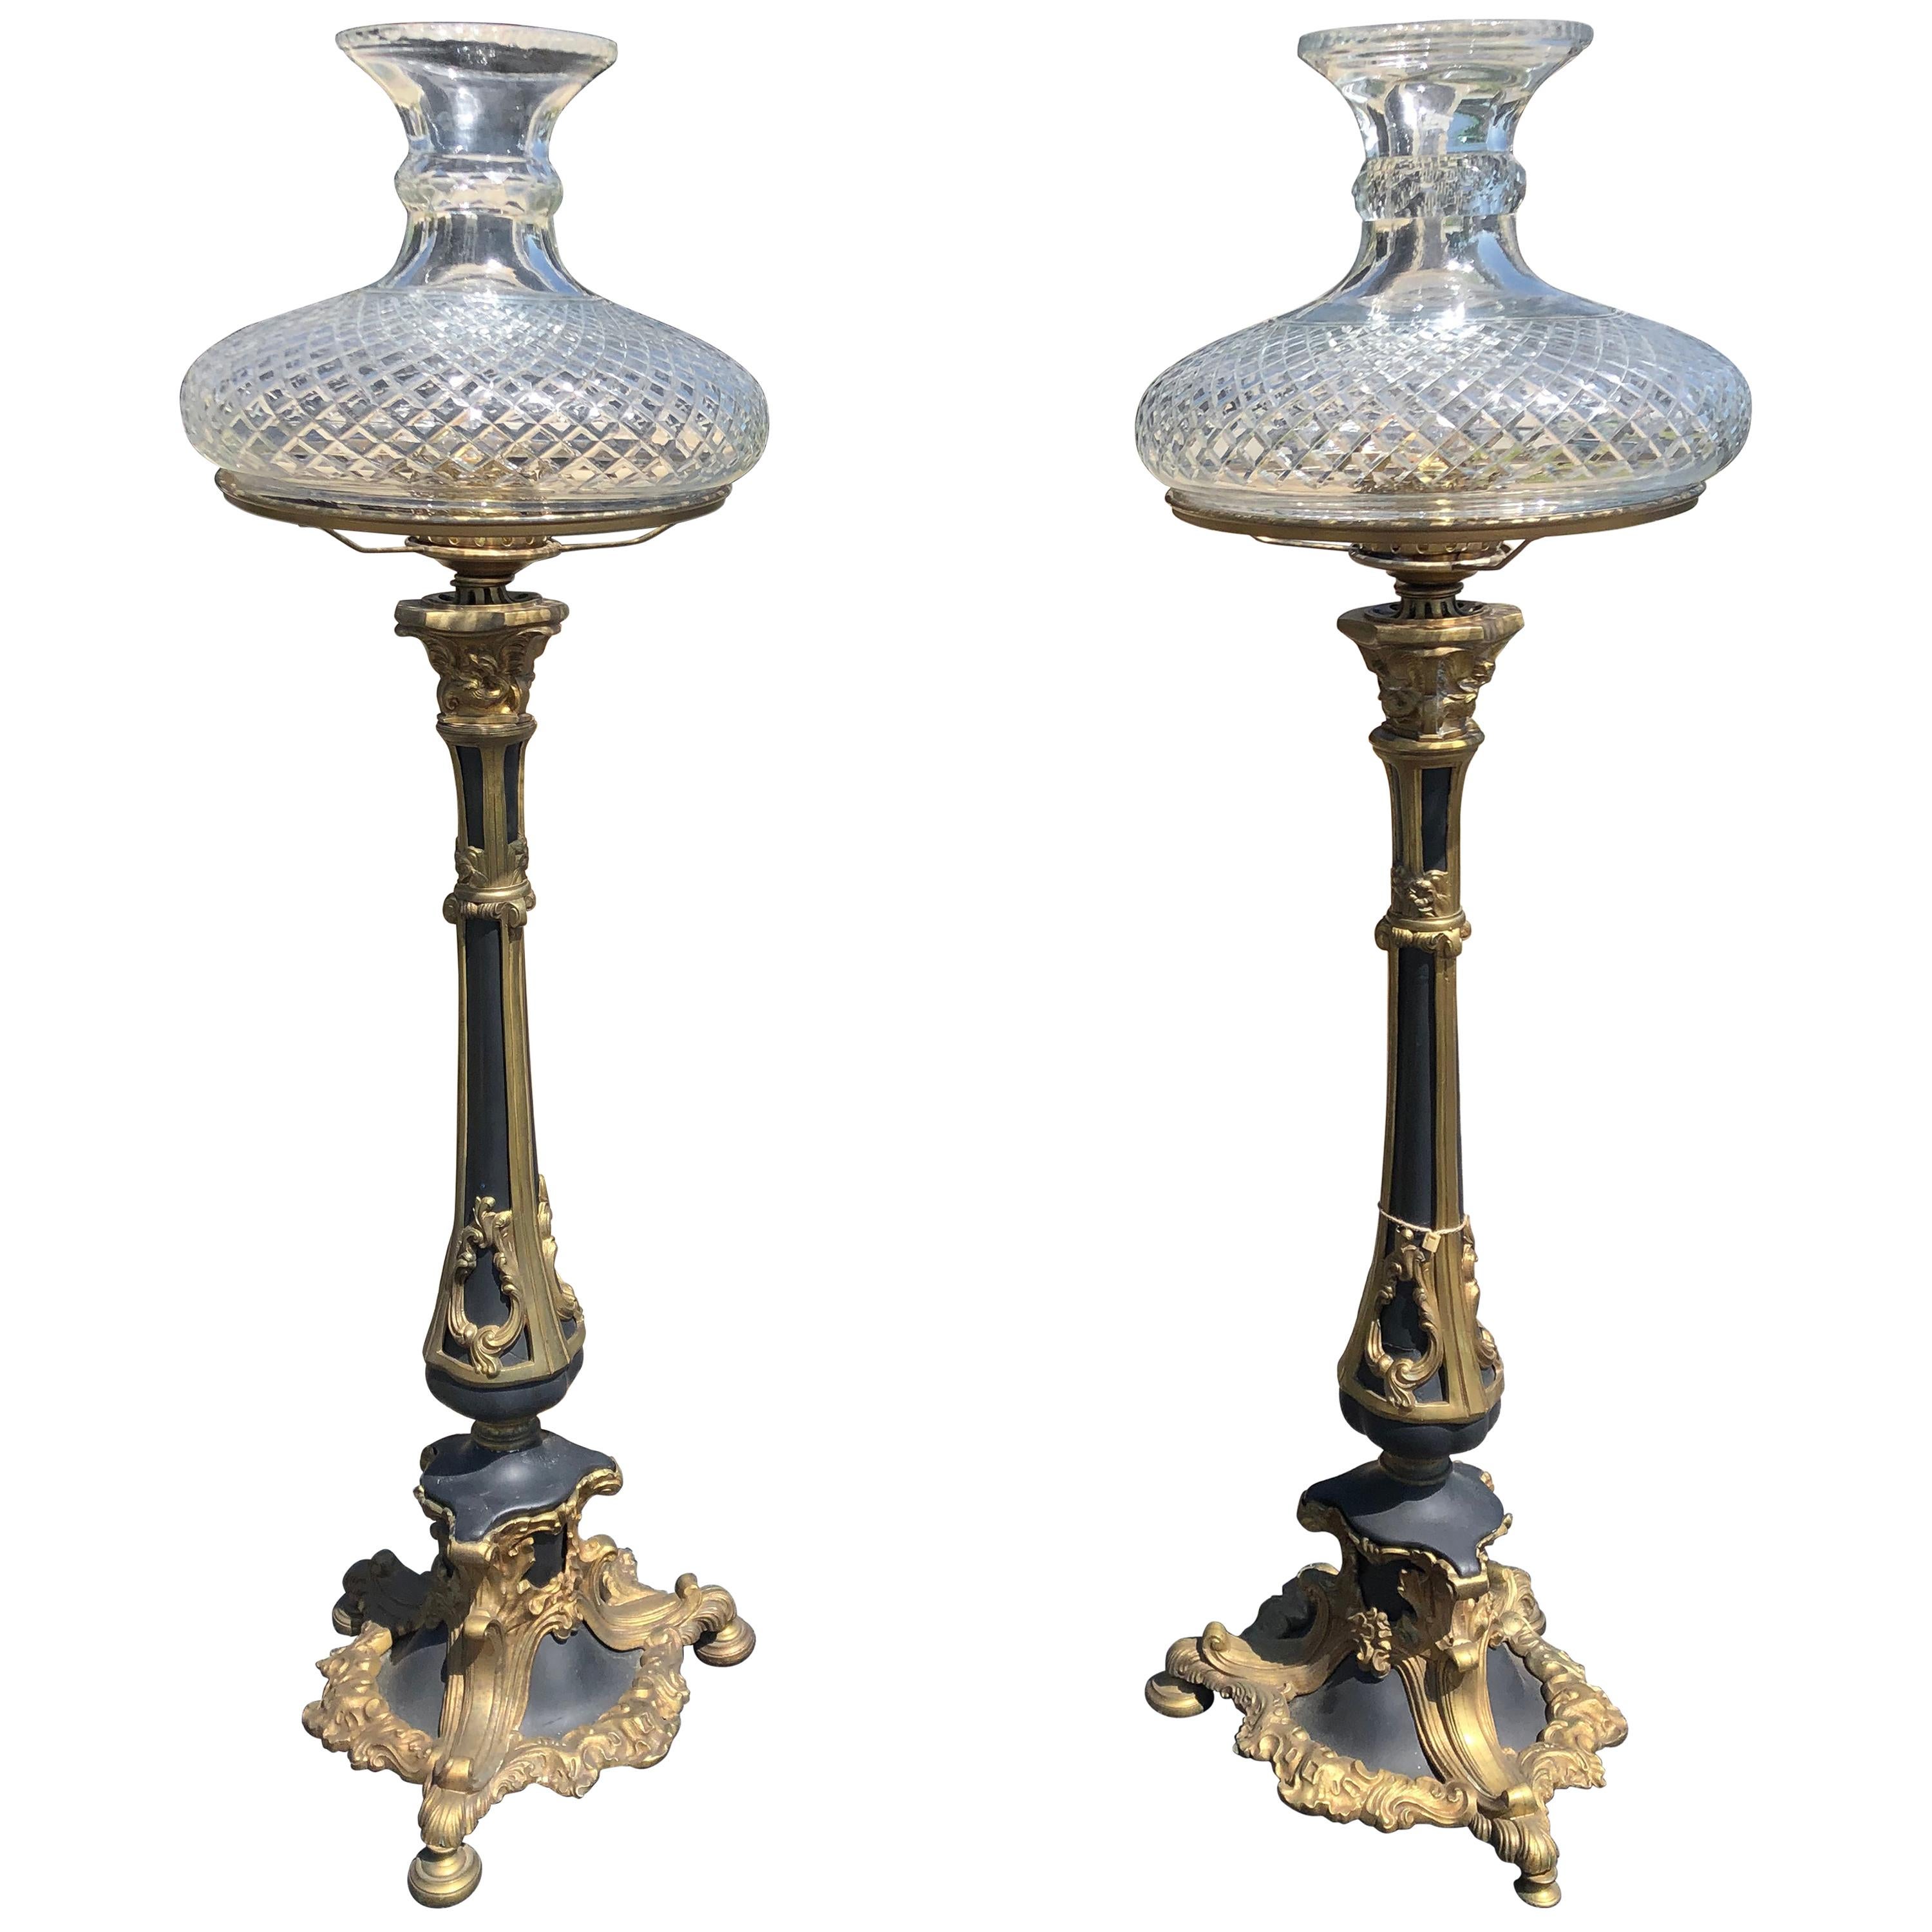 Pair of 19th Century American Bronze Astral Lamps